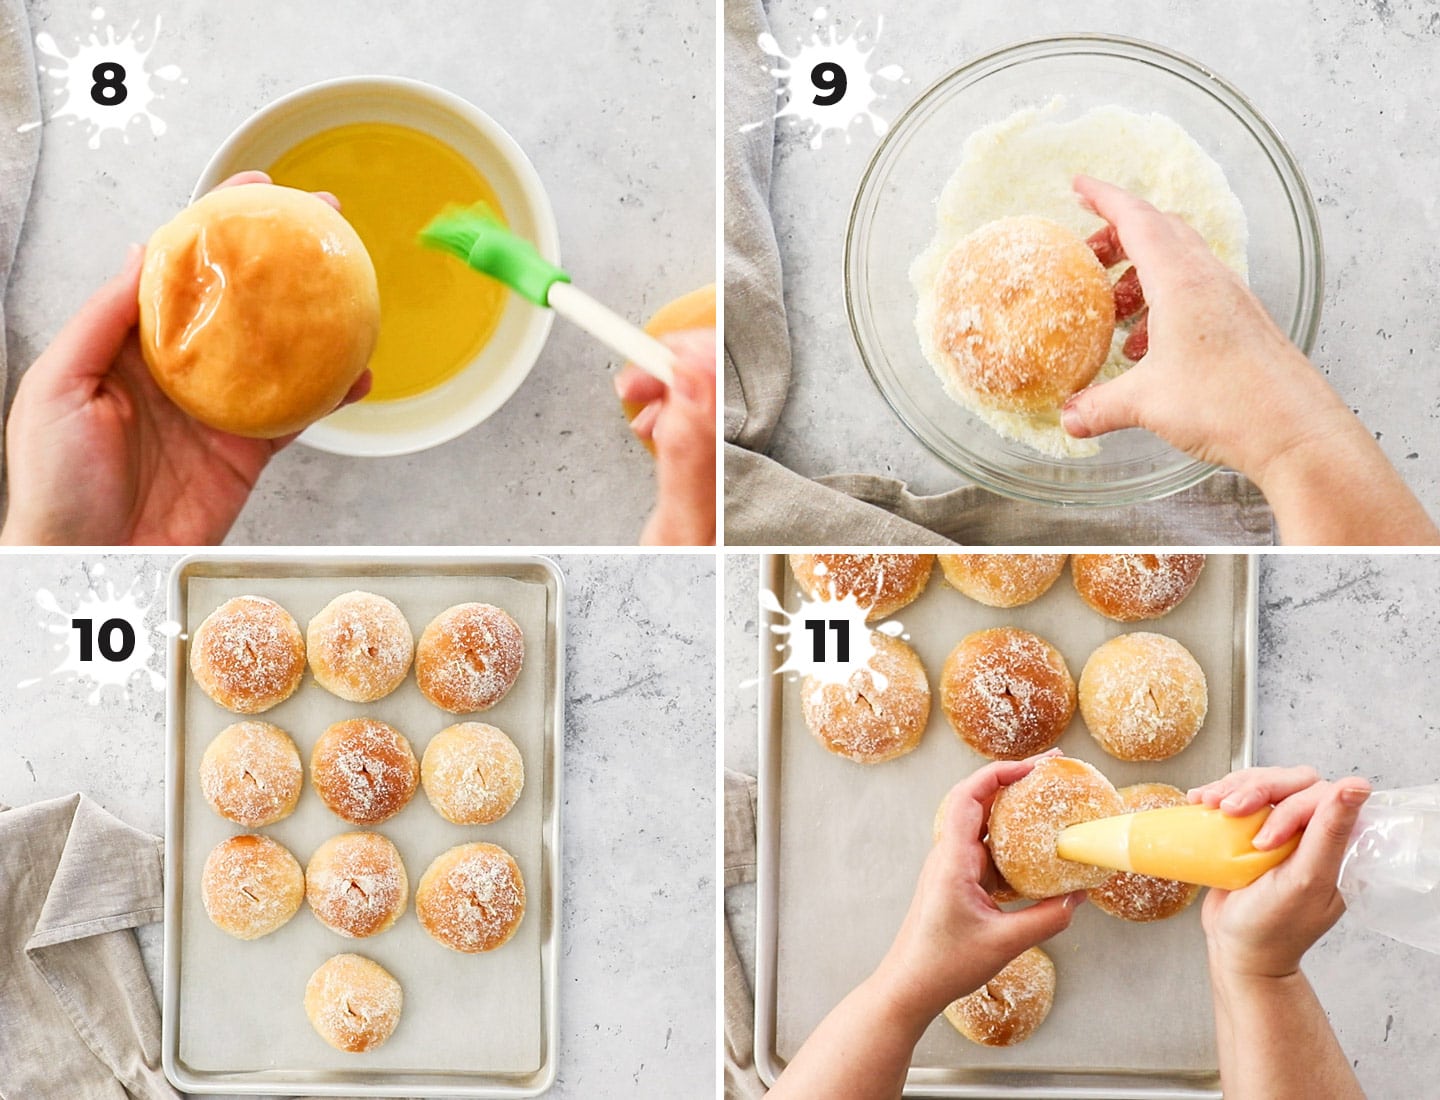 A collage showing how to coat and fill the donuts.